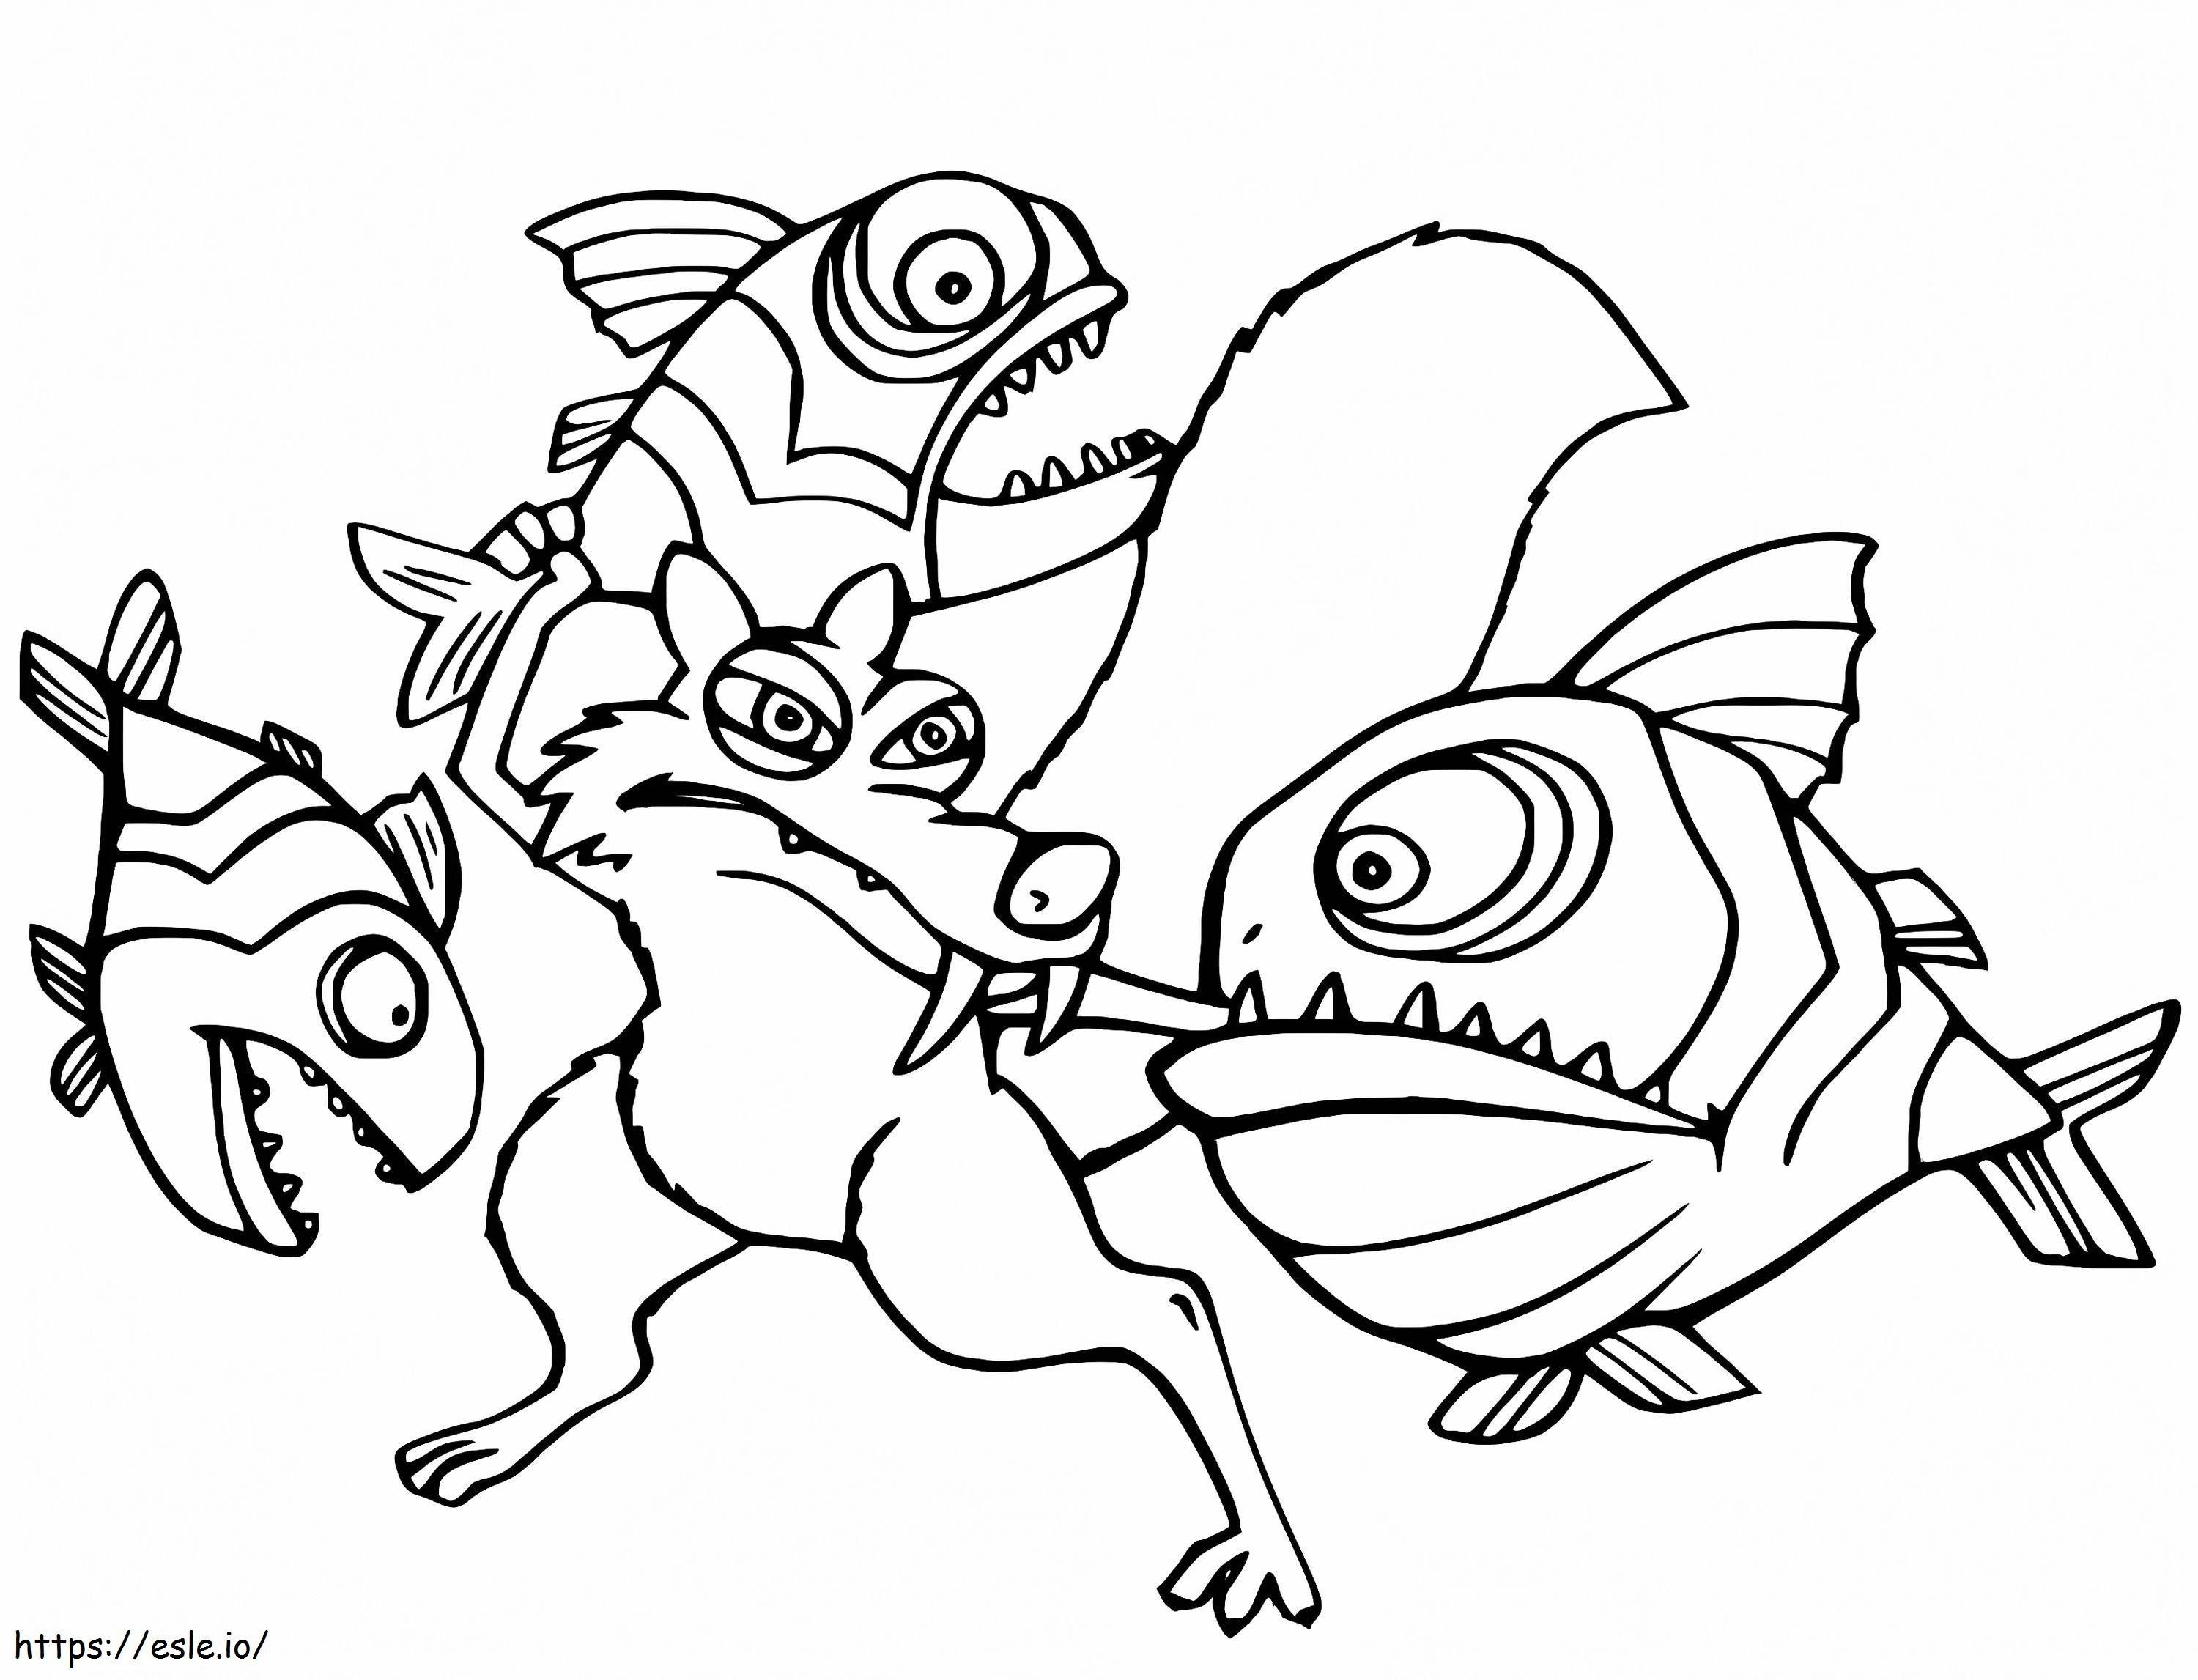 Scrat With Piranhas coloring page